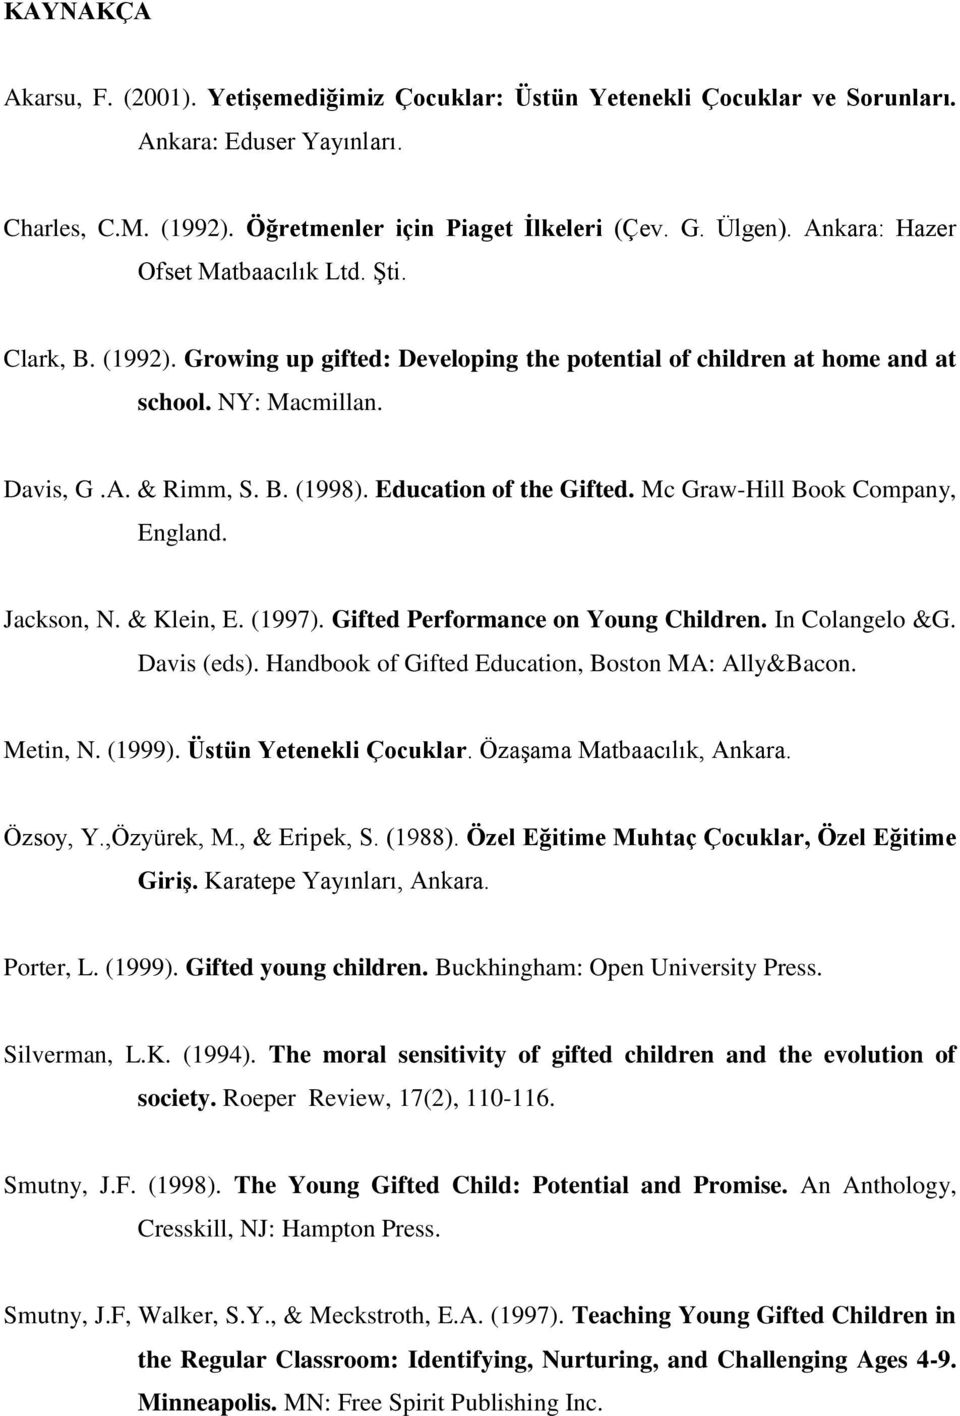 Education of the Gifted. Mc Graw-Hill Book Company, England. Jackson, N. & Klein, E. (1997). Gifted Performance on Young Children. In Colangelo &G. Davis (eds).